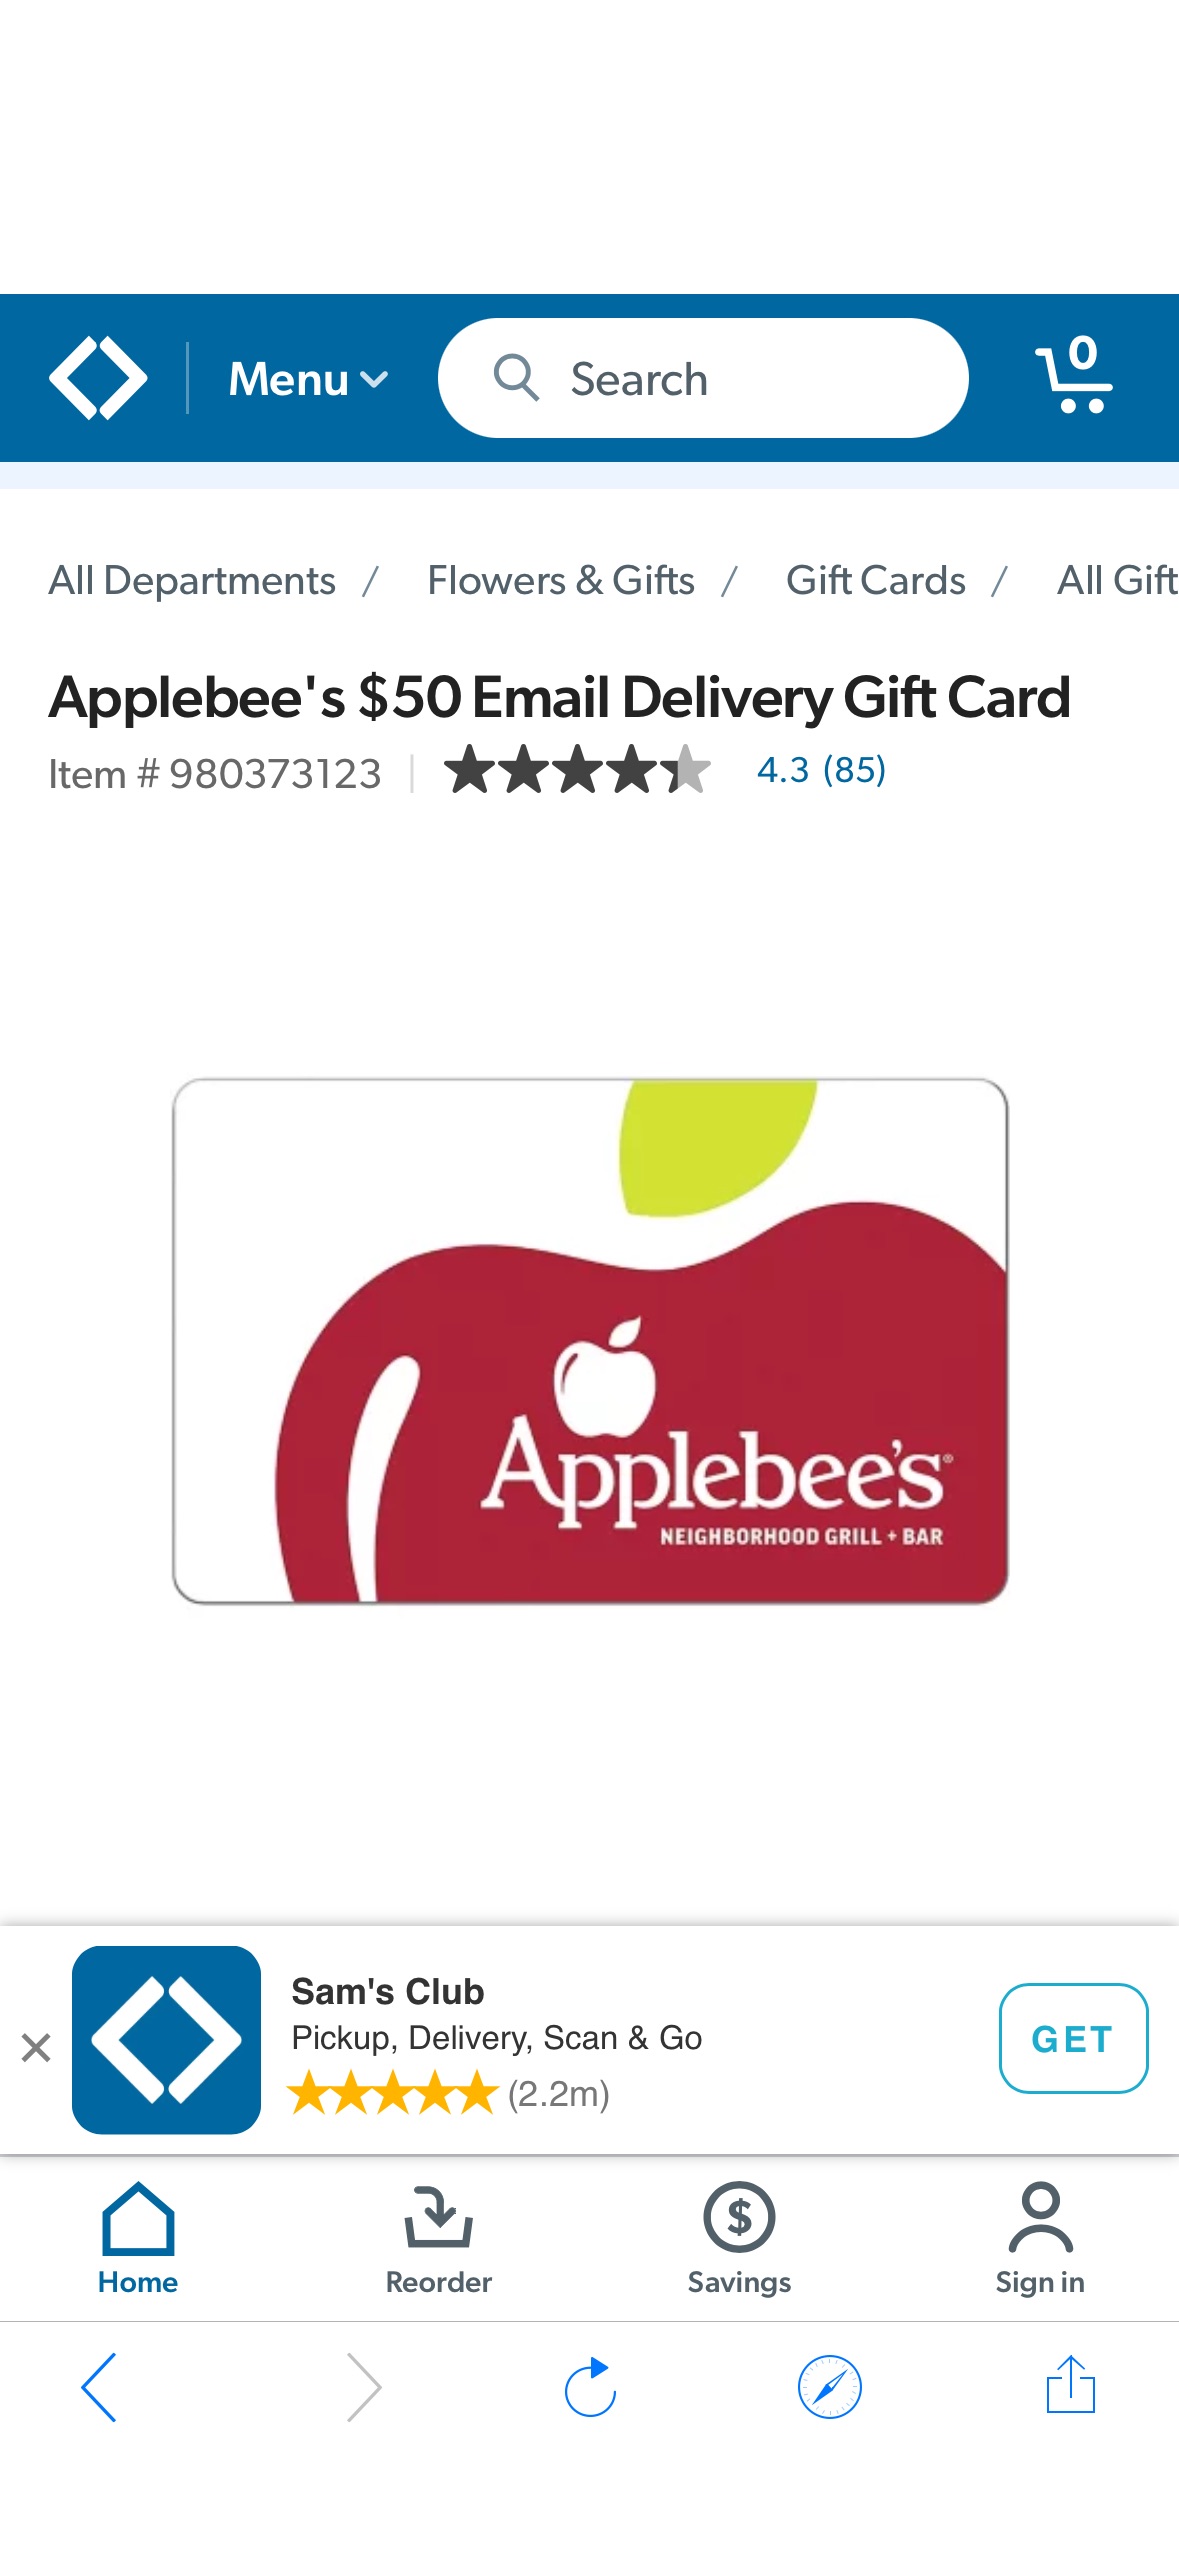 Applebee's $50 Email Delivery Gift Card - Sam's Club